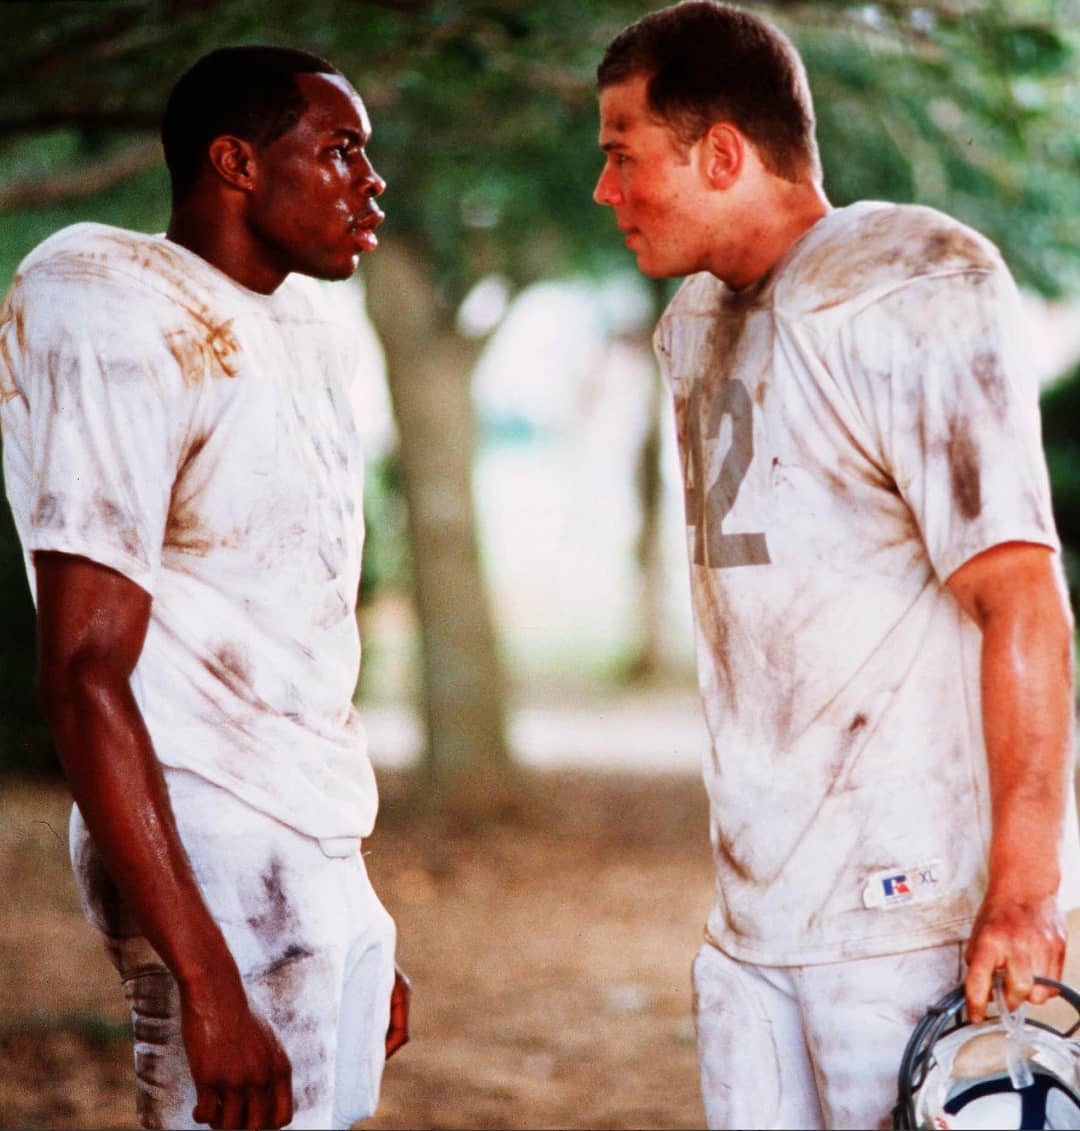 White football player and African football player talking from Remember the Titans. Photo by Instagram user @aleshashinobi